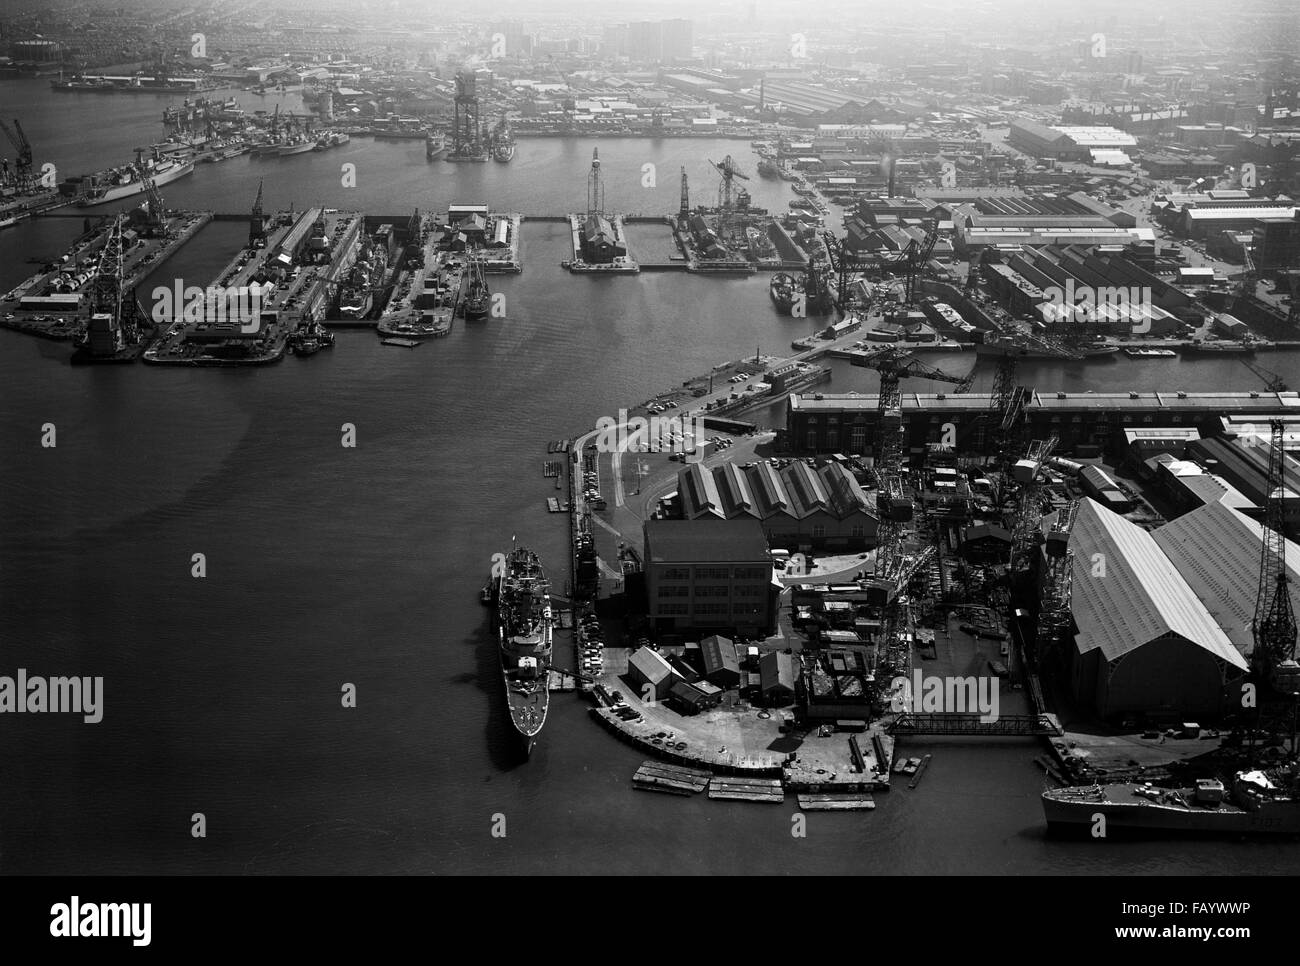 AJAXNETPHOTO - 1970S - PORTSMOUTH, ENGLAND. - NAVAL BASE AERIAL - AN AERIAL VIEW OF THE NORTH SECTOR OF THE NAVAL BASE SHOWING (DISTANT, TOP LEFT.) FLATHOUSE QUAY AND NORTH WALL JETTY, HAMMERHEAD CRANE (TOP,LEFT CENTRE.), BASIN AND DRY DOCKS (MIDDLE.) AND NORTH WEST CORNER WITH HMS CHARYBIDIS MOORED (FORE&AFT,BOTTOM,CENTRE.). HMS ROTHESAY (F107) MOORED BOTTOM RIGHT.   PHOTO:VT COLLECTION/AJXNETPHOTO REF:VT5 NB70 AVLVT5C VTCOLL 00001 Stock Photo